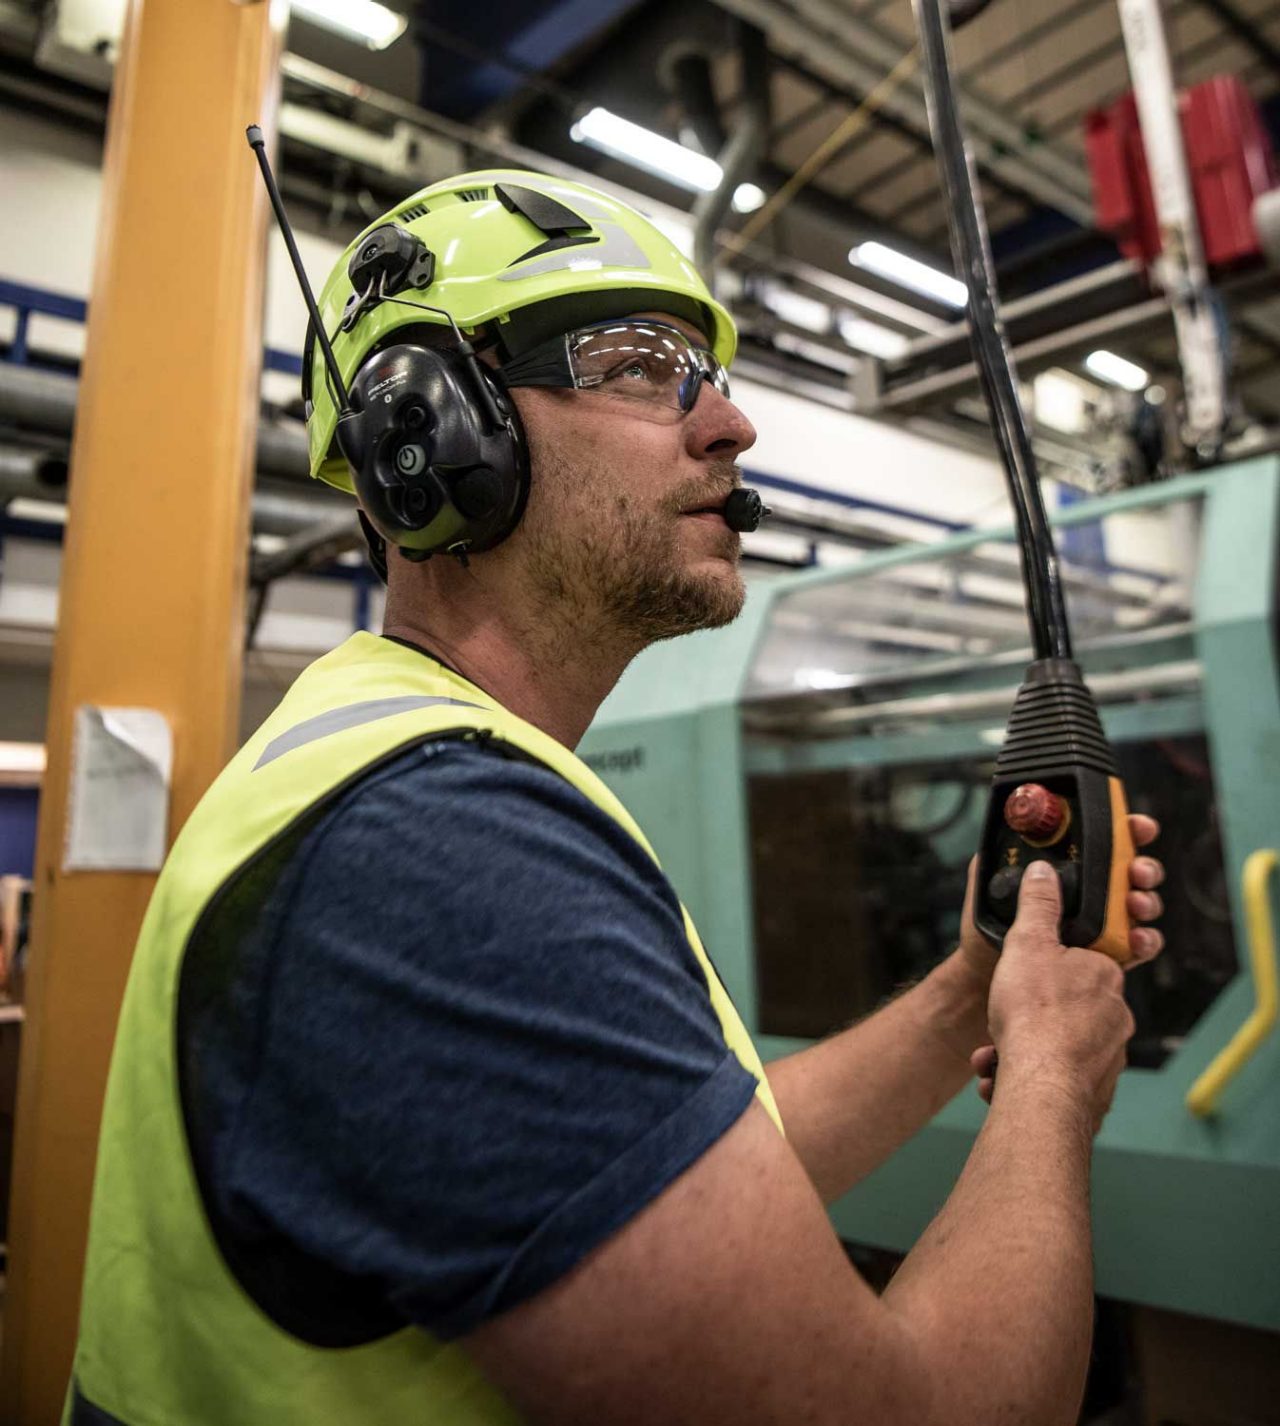 man inside with machinery wearing yellow helmet with headphones with Bluetooth communication features